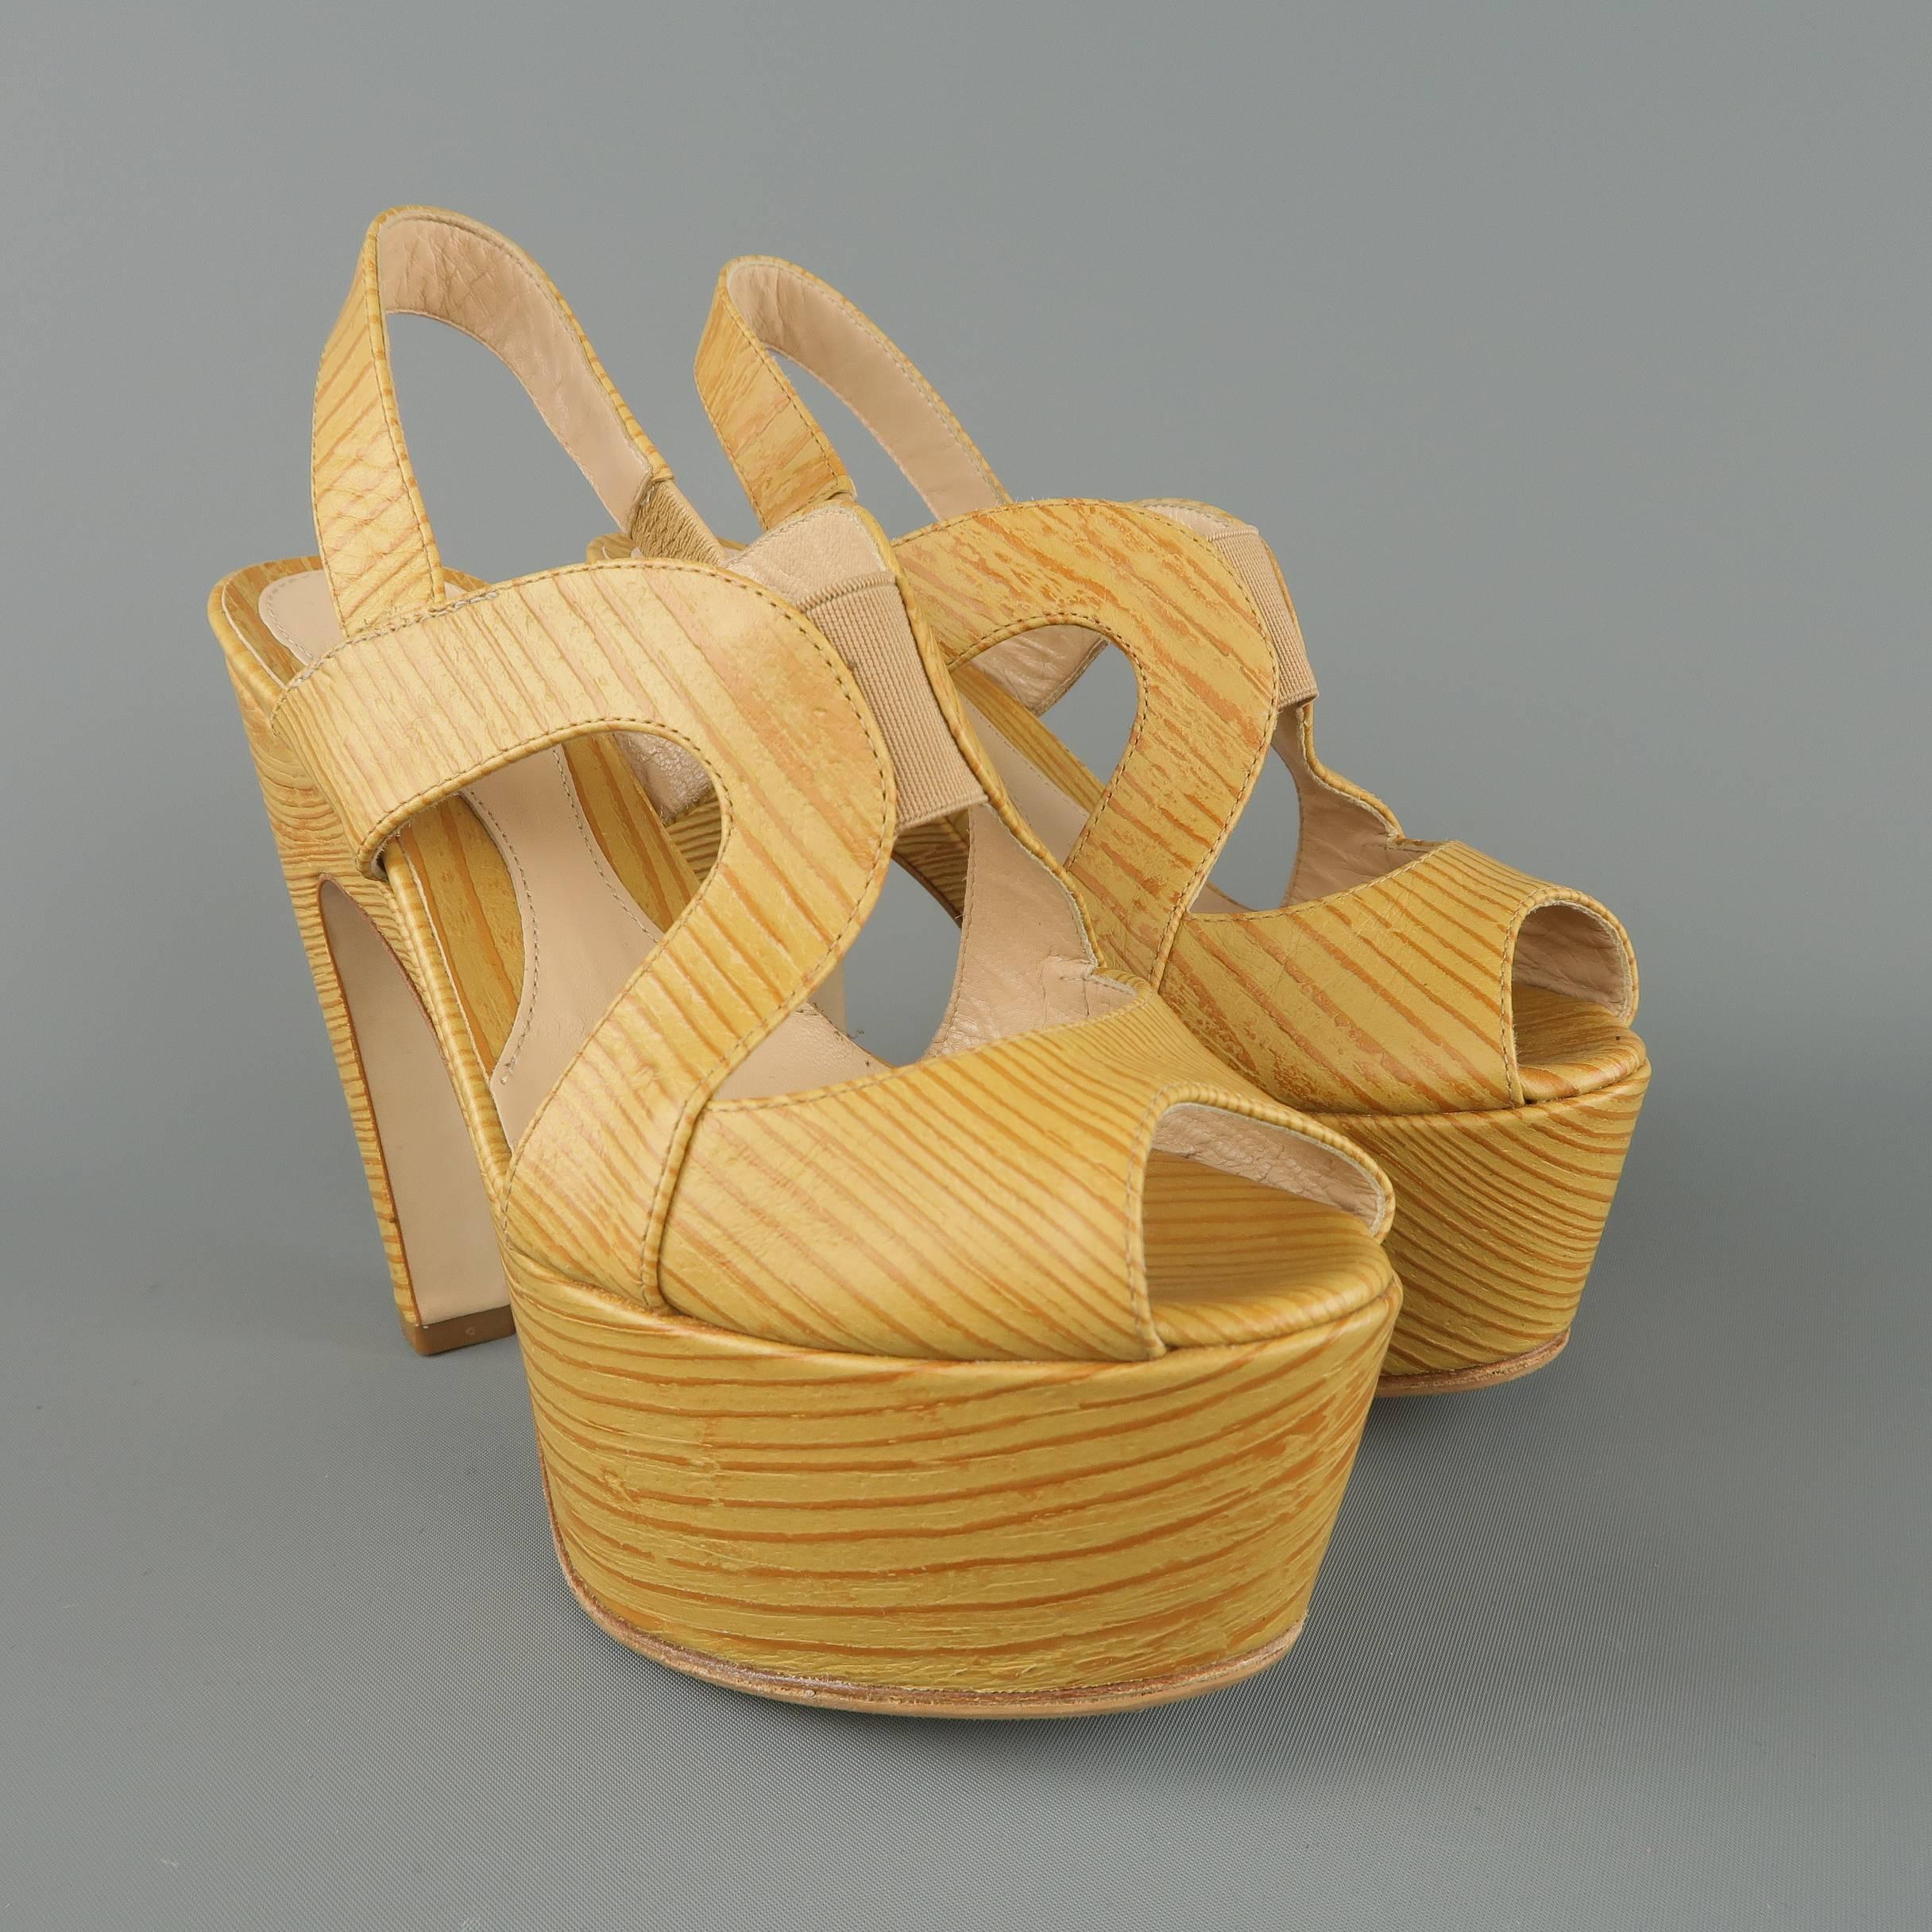 FENDI sandals come in a golden beige leather embossed to look like wood and features a peep toe, curved straps, slingback, and chunky curved heel with platform. Made in Italy.
 
Excellent Pre-Owned Condition.
Marked: IT 35.5
 
Measurements:
 
Heel: